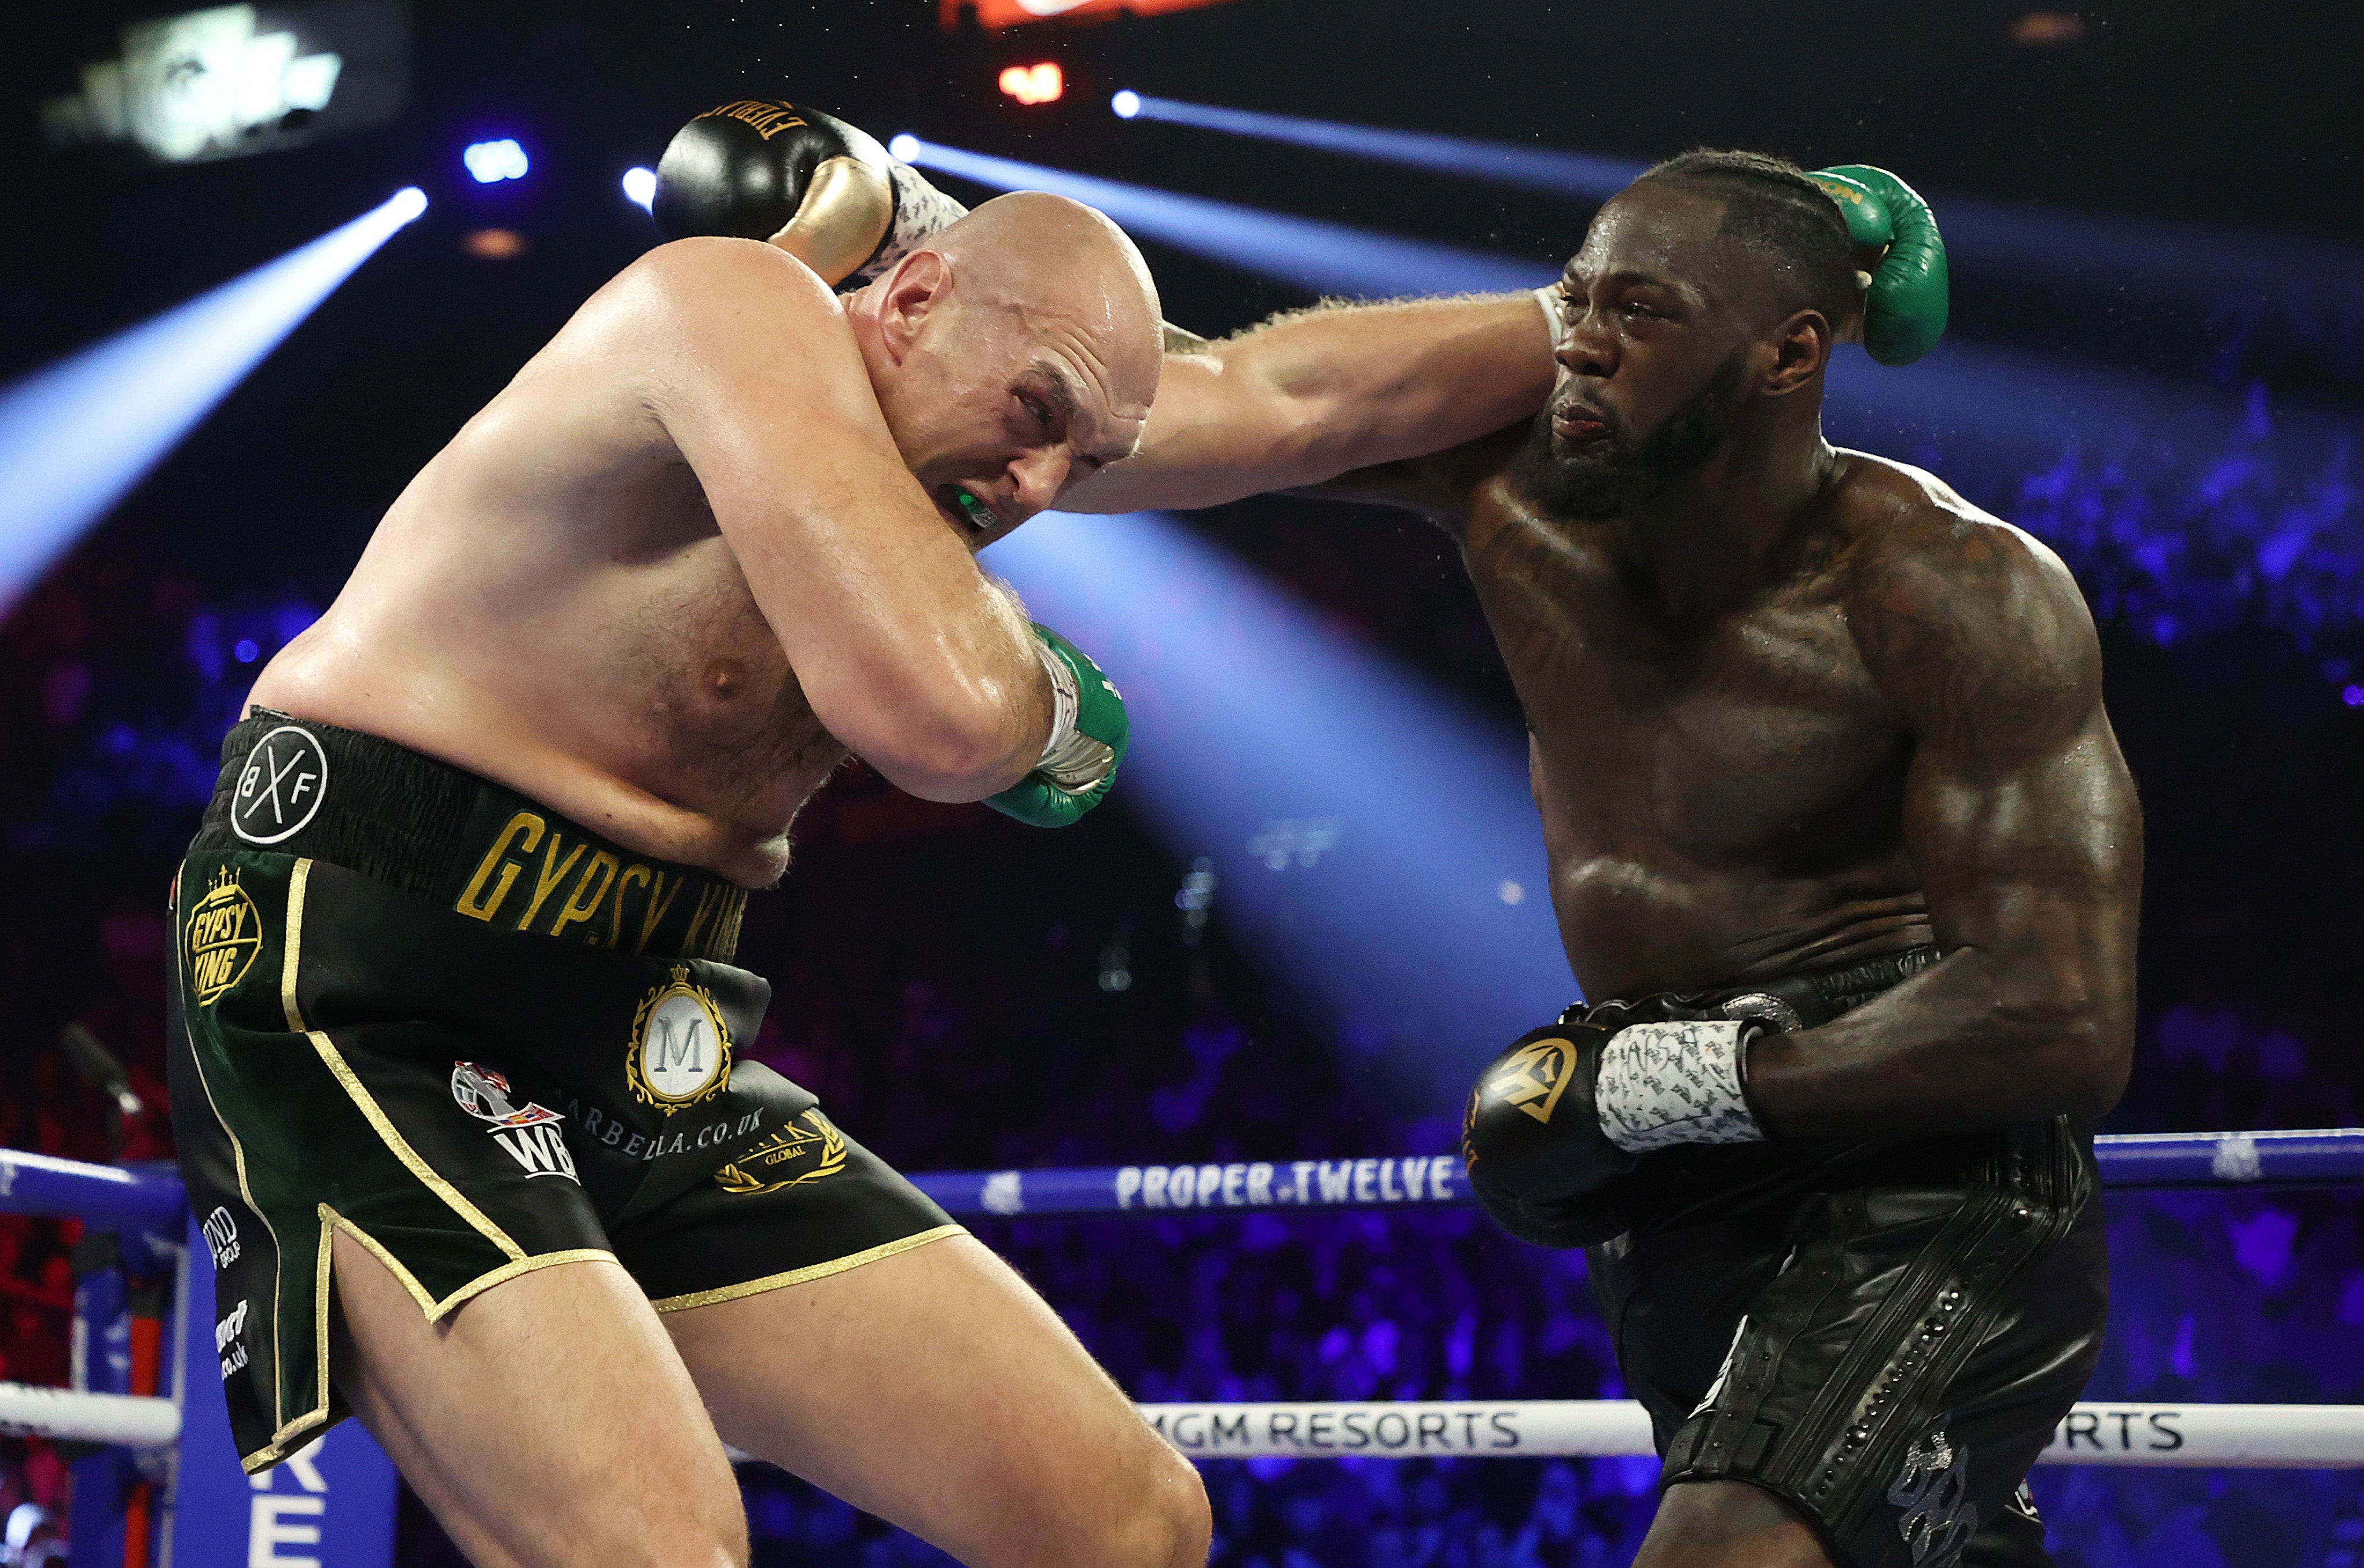 Wilder and Fury will bout for a third time on 9 October